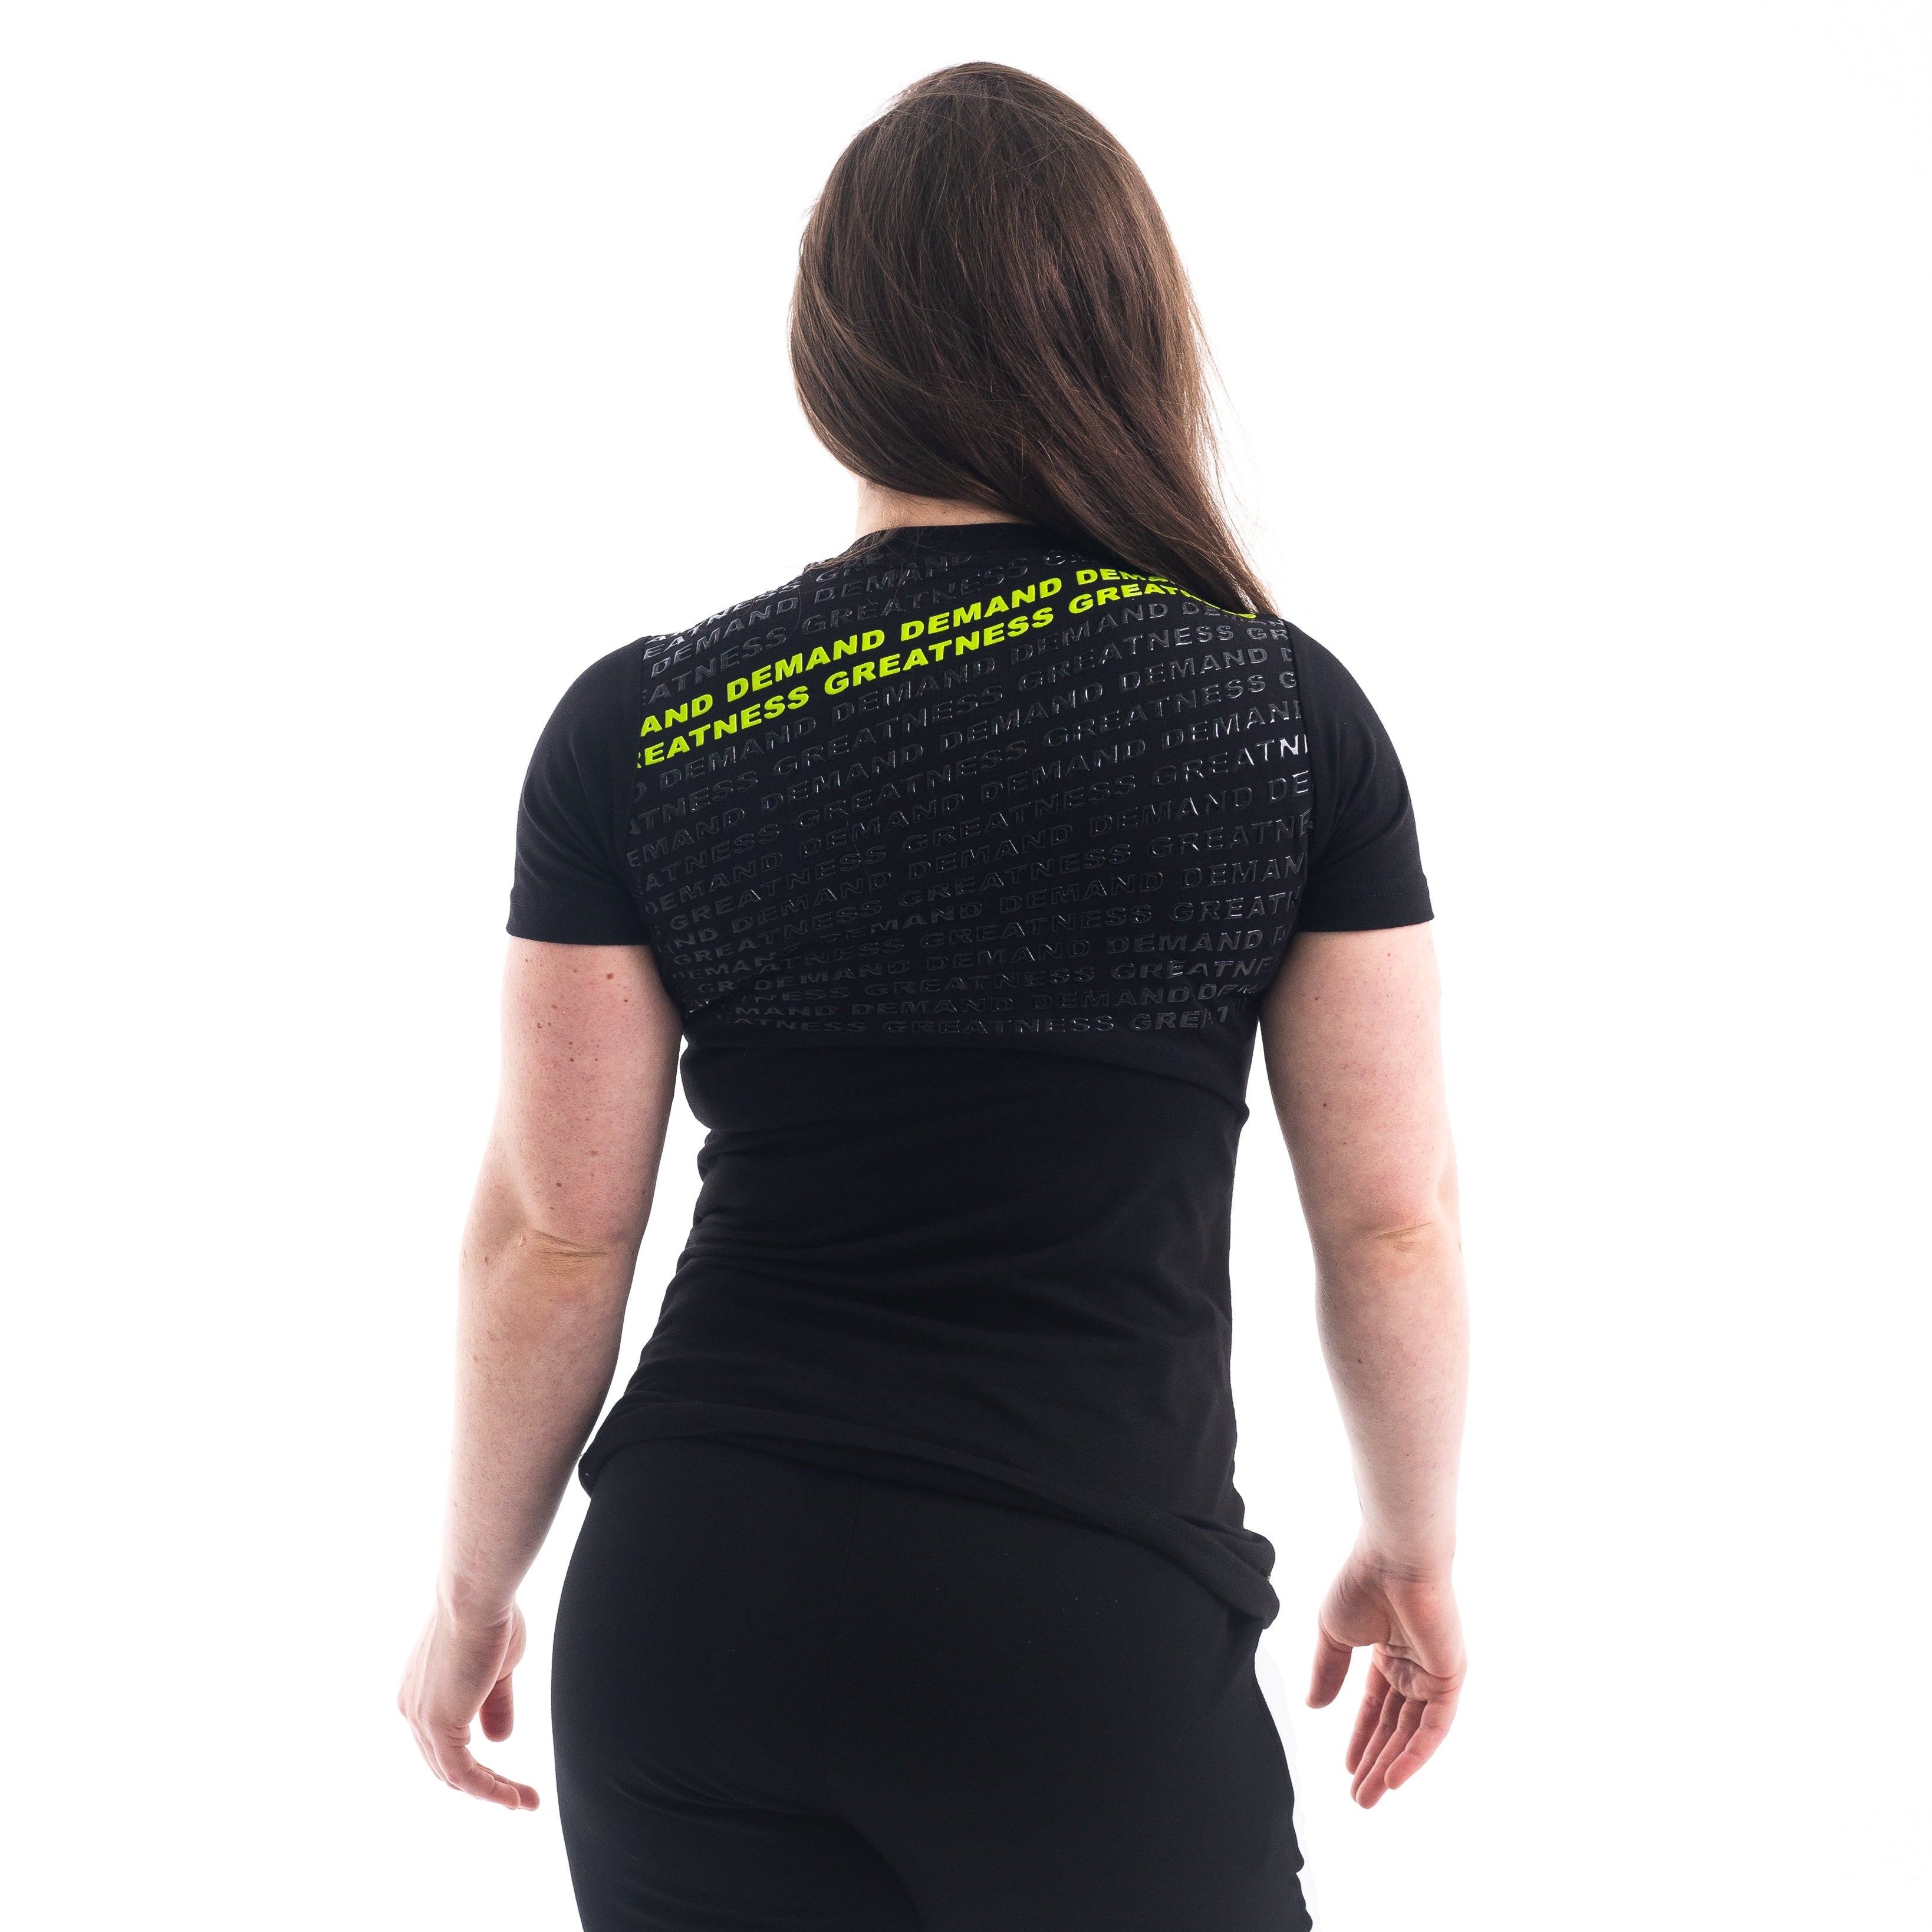 VorText Alien Women's Bar Grip Shirt. Make a stand on the platform as you continue to approach perfection to prove you are not of this world. Whether pressing, pulling, squatting or any other variational movement the knurling is always there. The silicone bar grip helps with slippery commercial benches and bars and anchors the barbell to your back. All A7 Powerlifting Equipment shipping to France, Spain, Ireland, Germany, Italy, Sweden and EU.